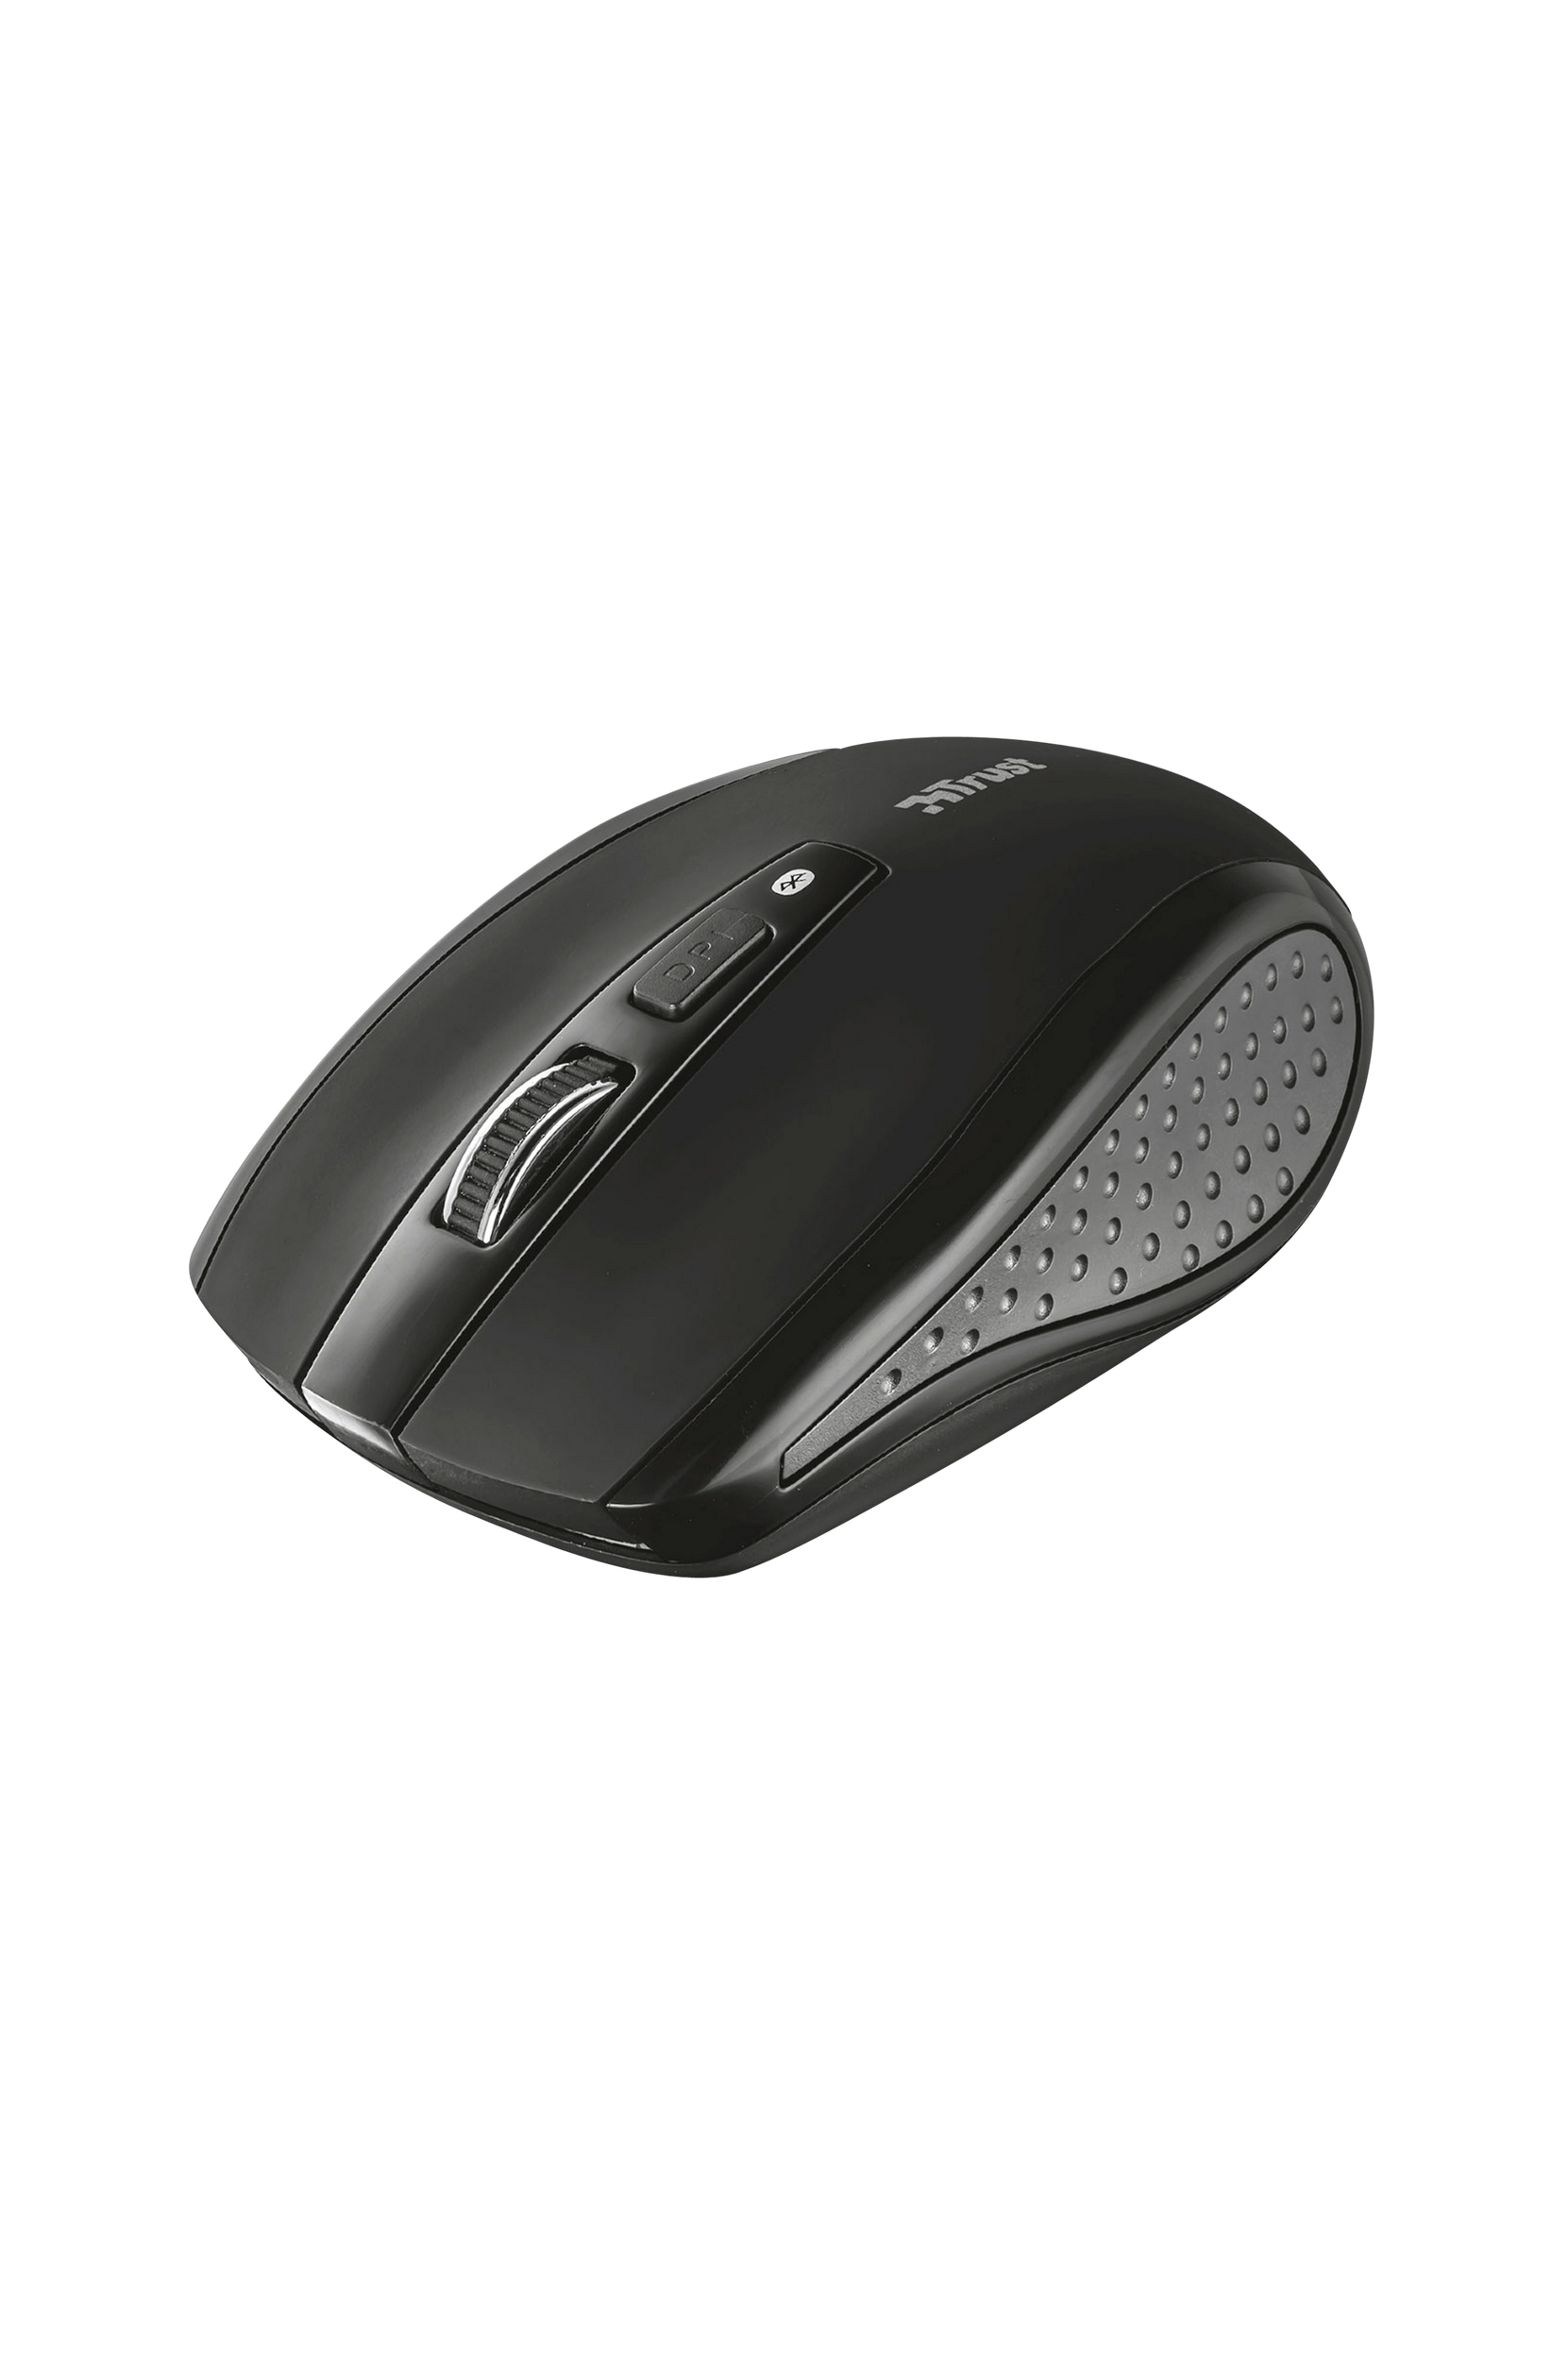 Siano Bluetooth Mouse Black, Trust